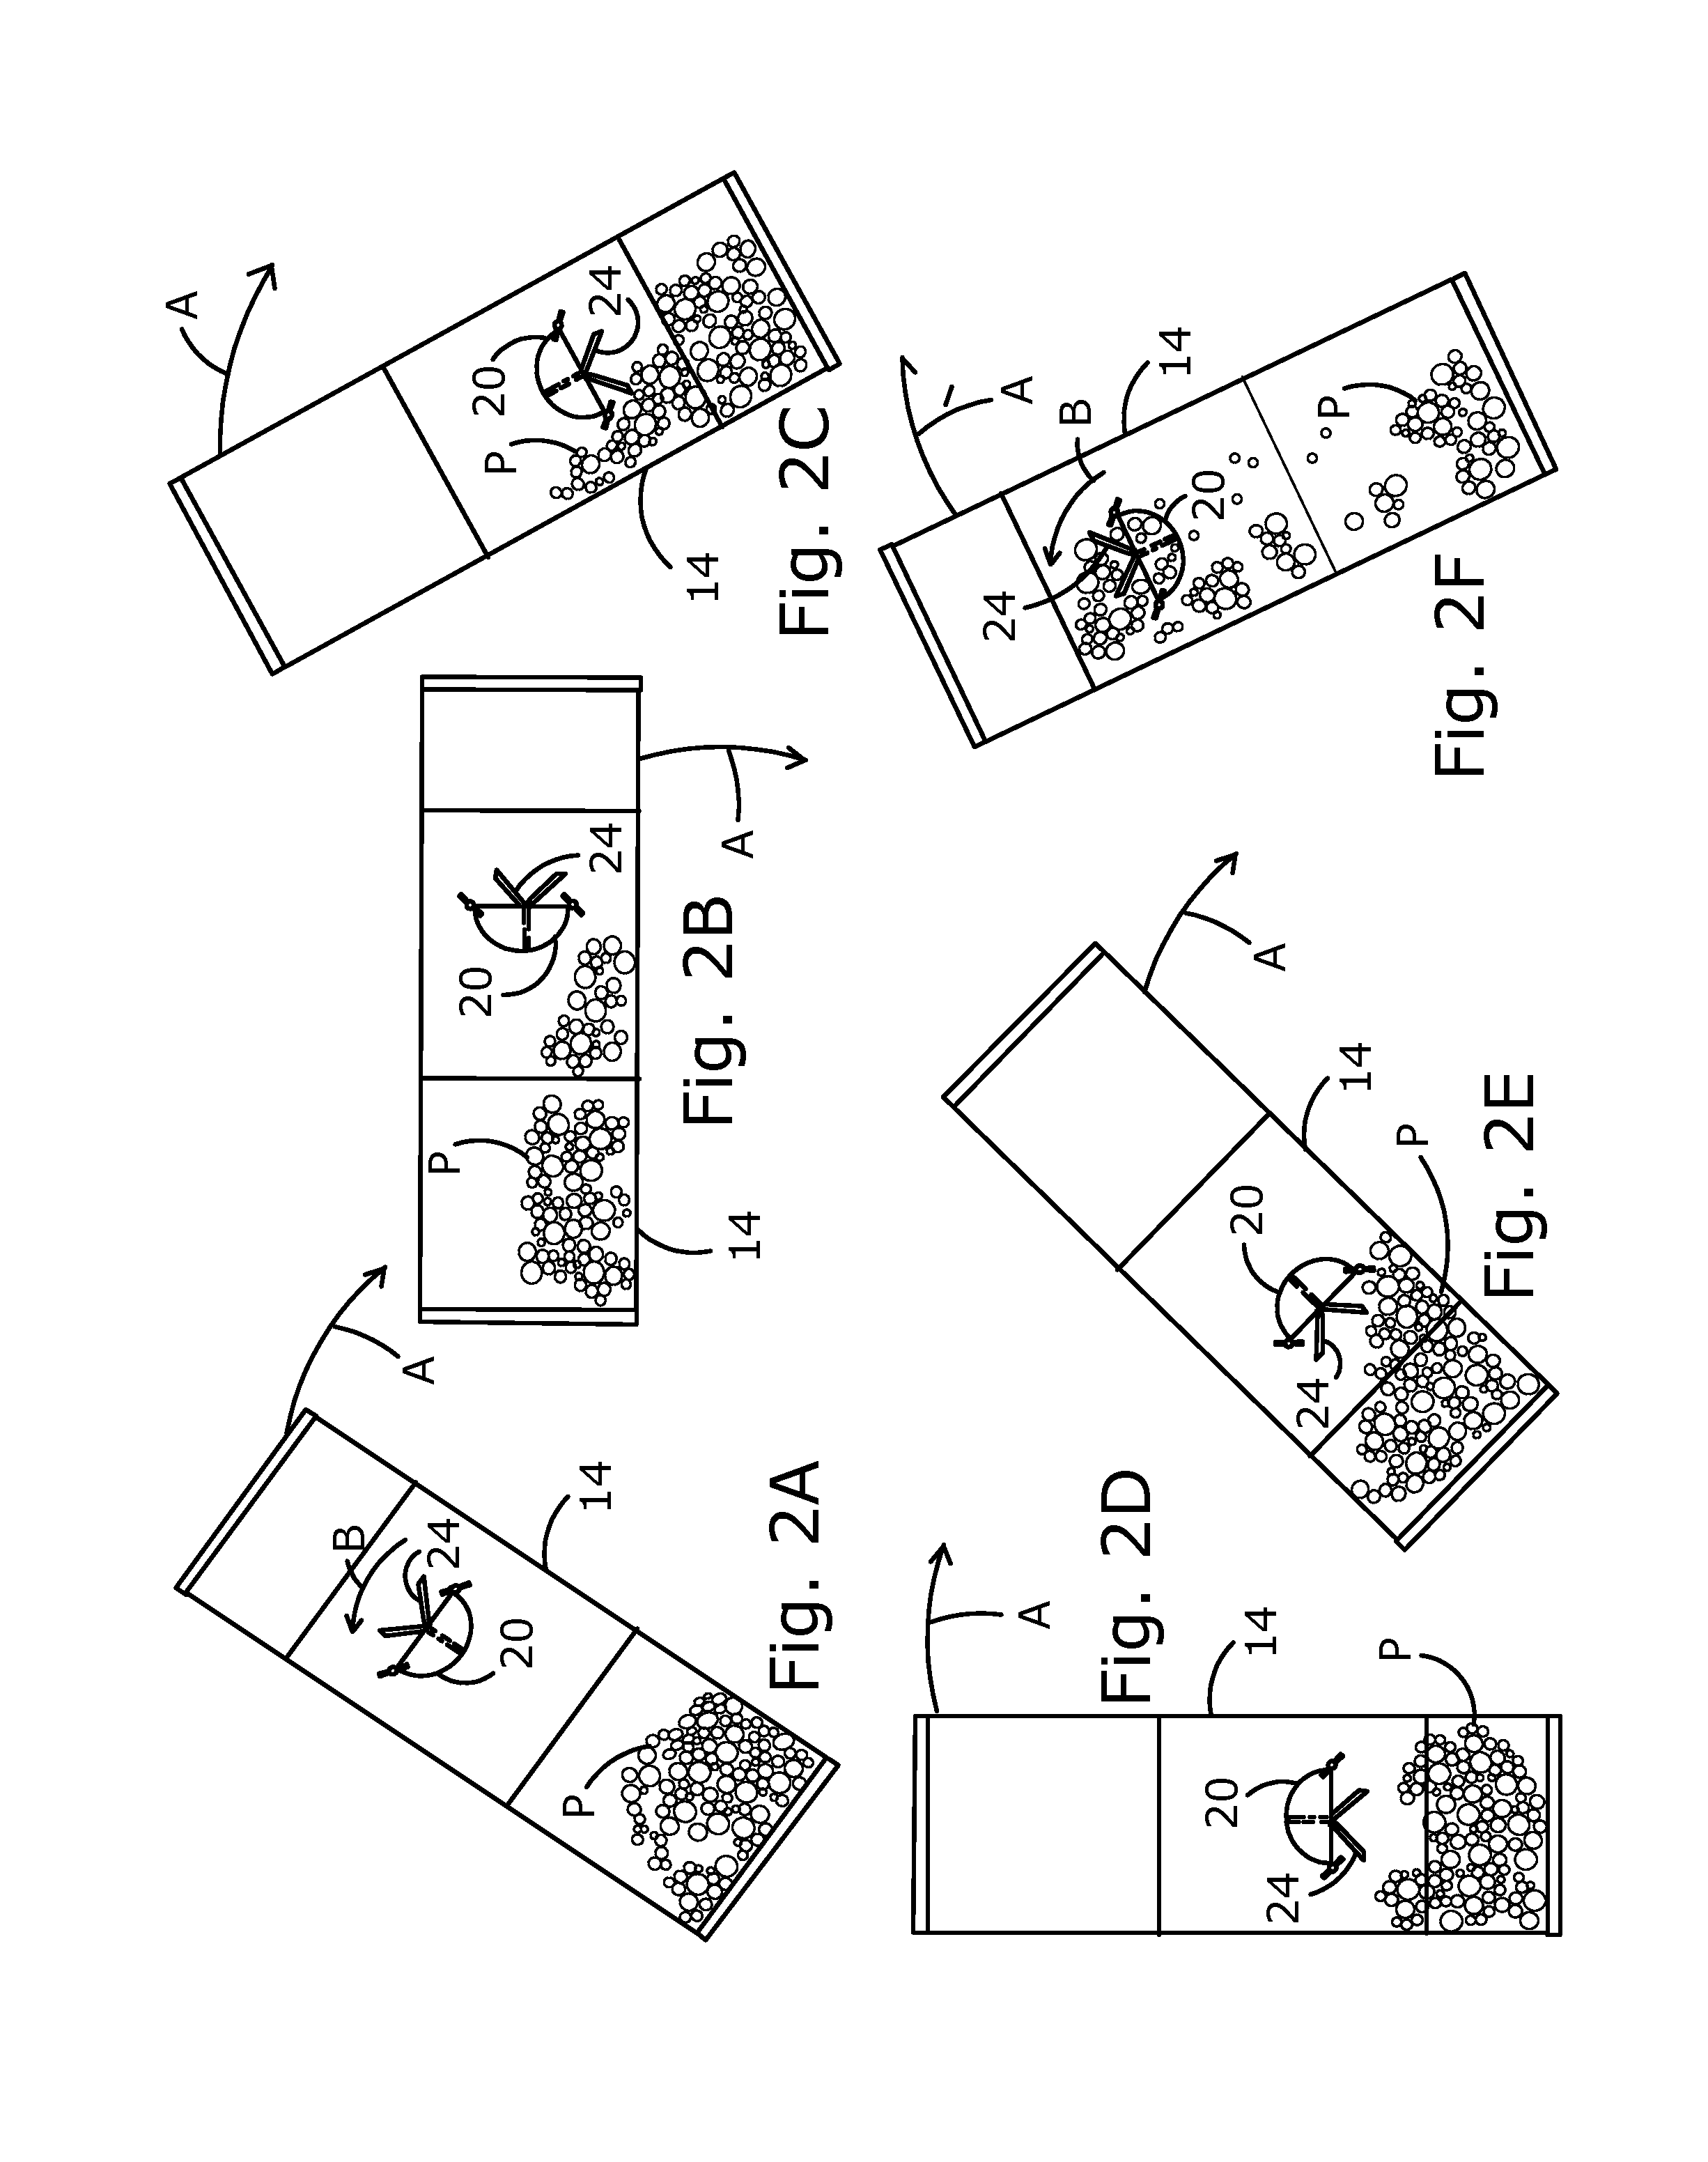 Apparatus for alternately sifting and blending powders in the same operation